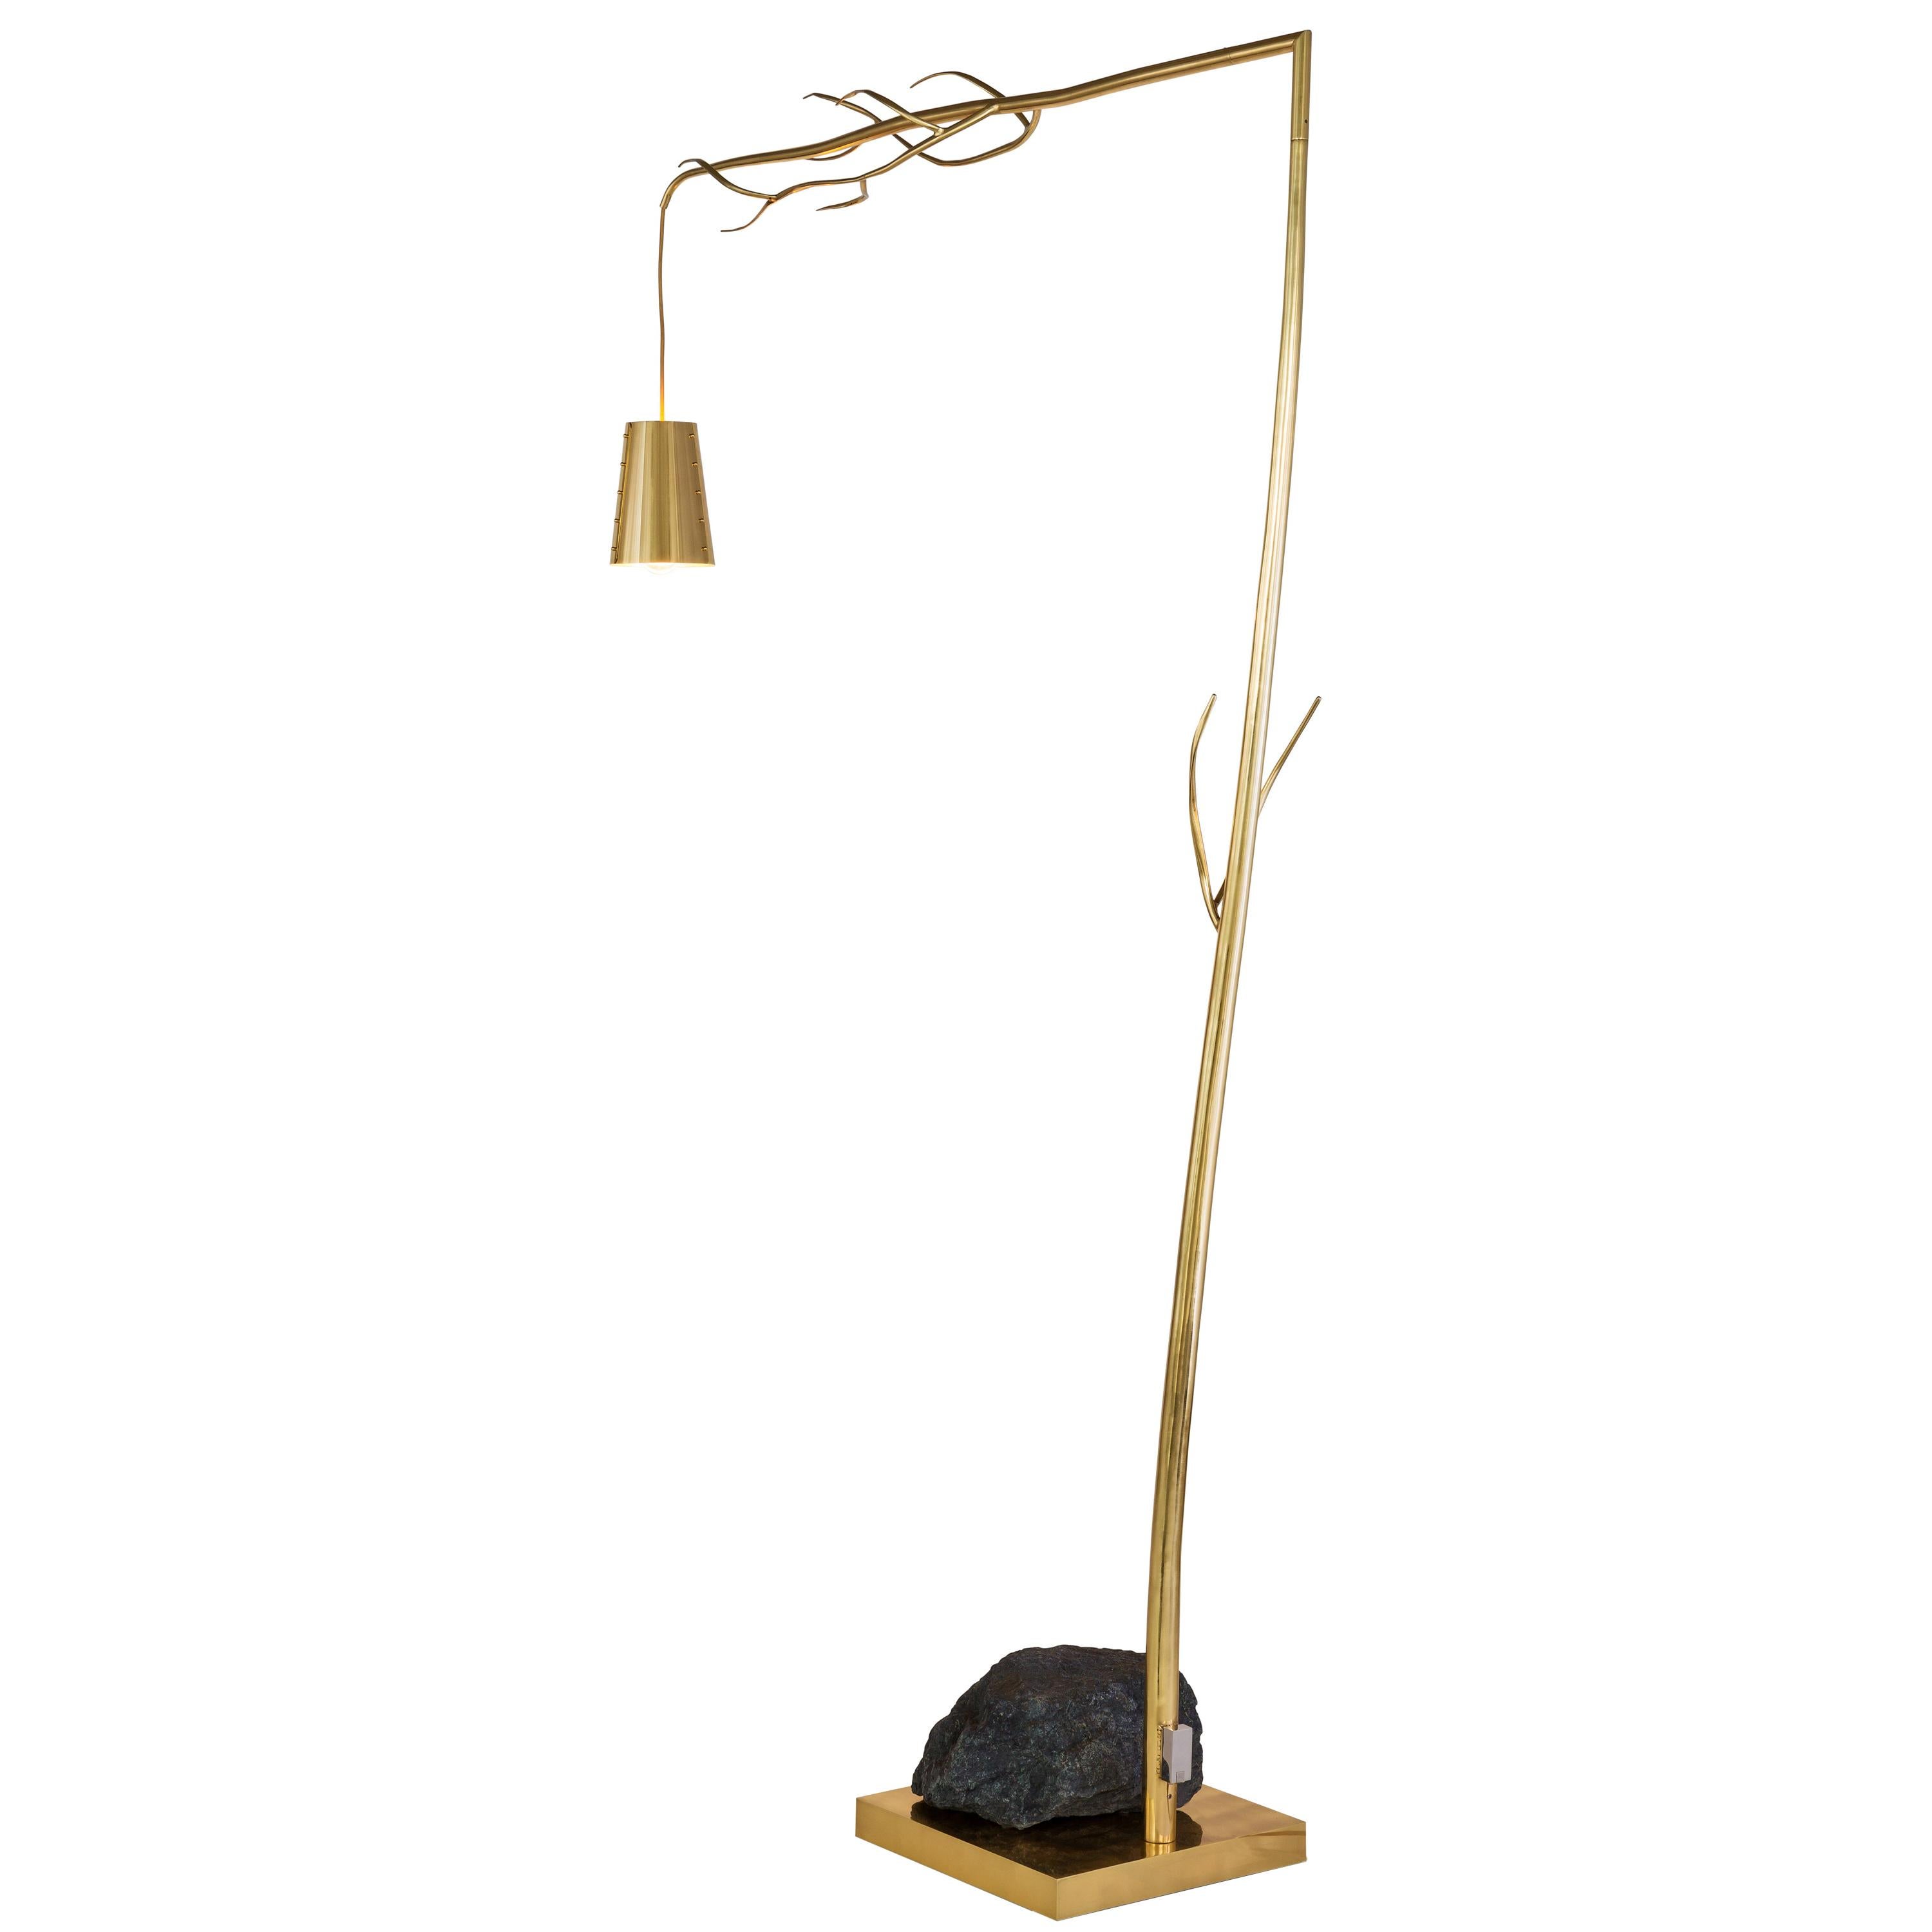 Modern Floor Lamp with a Unique Rock in a Brass Burnished Finish, Flintstone